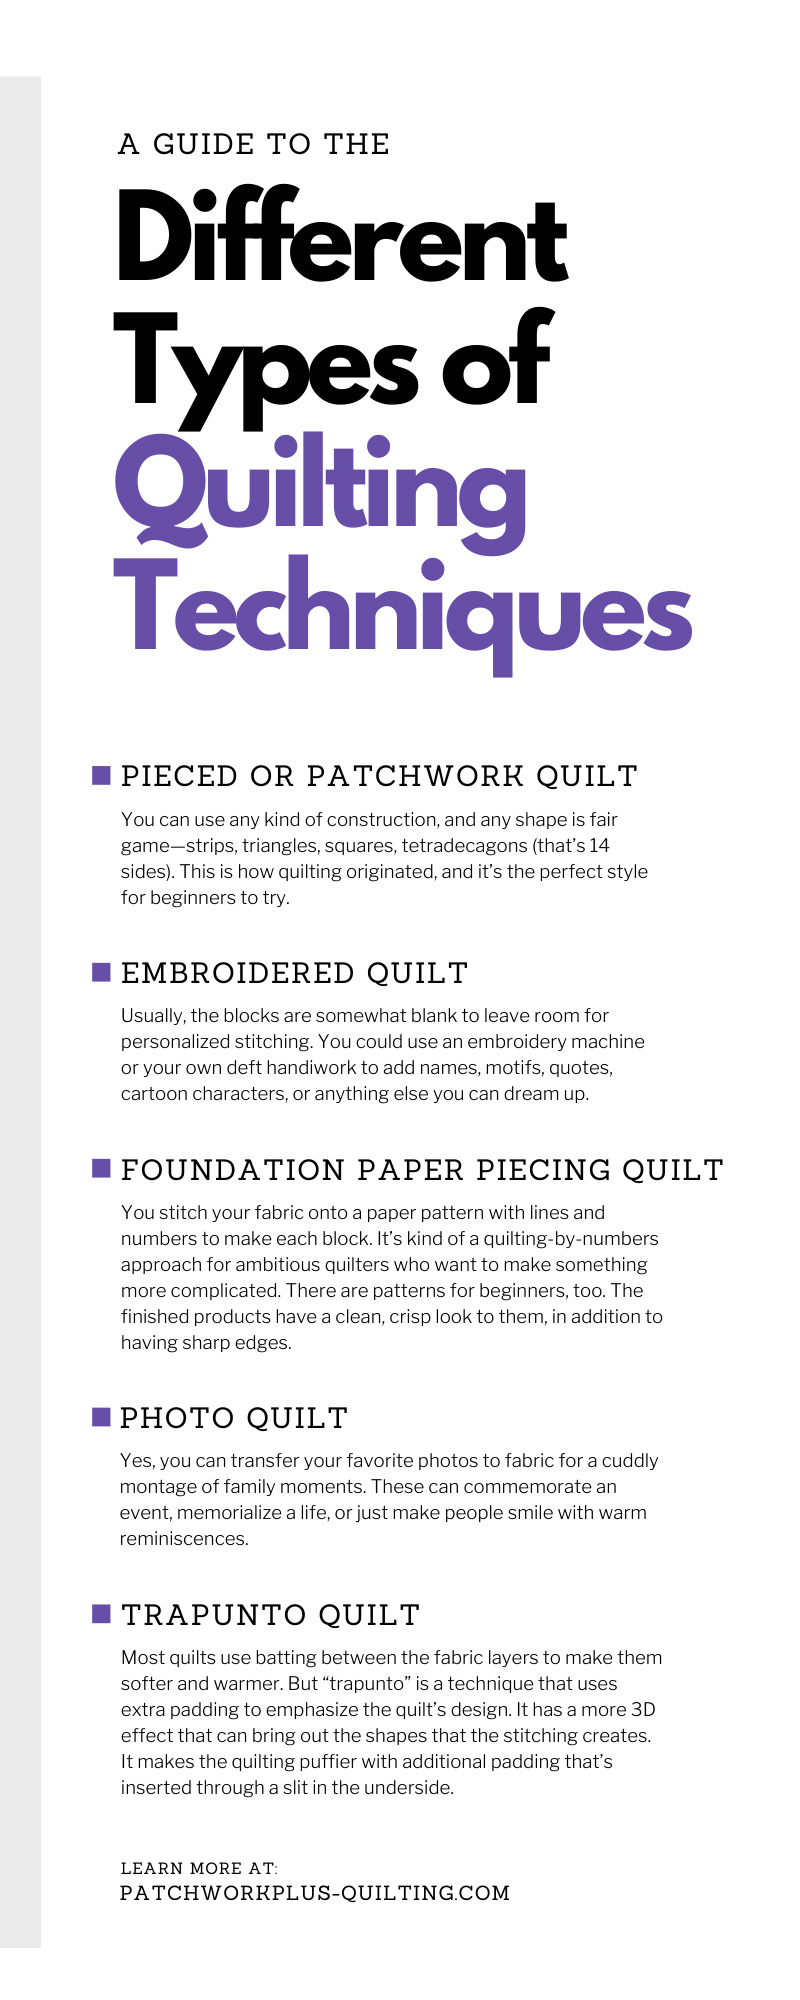 A Guide To the Different Types of Quilting Techniques